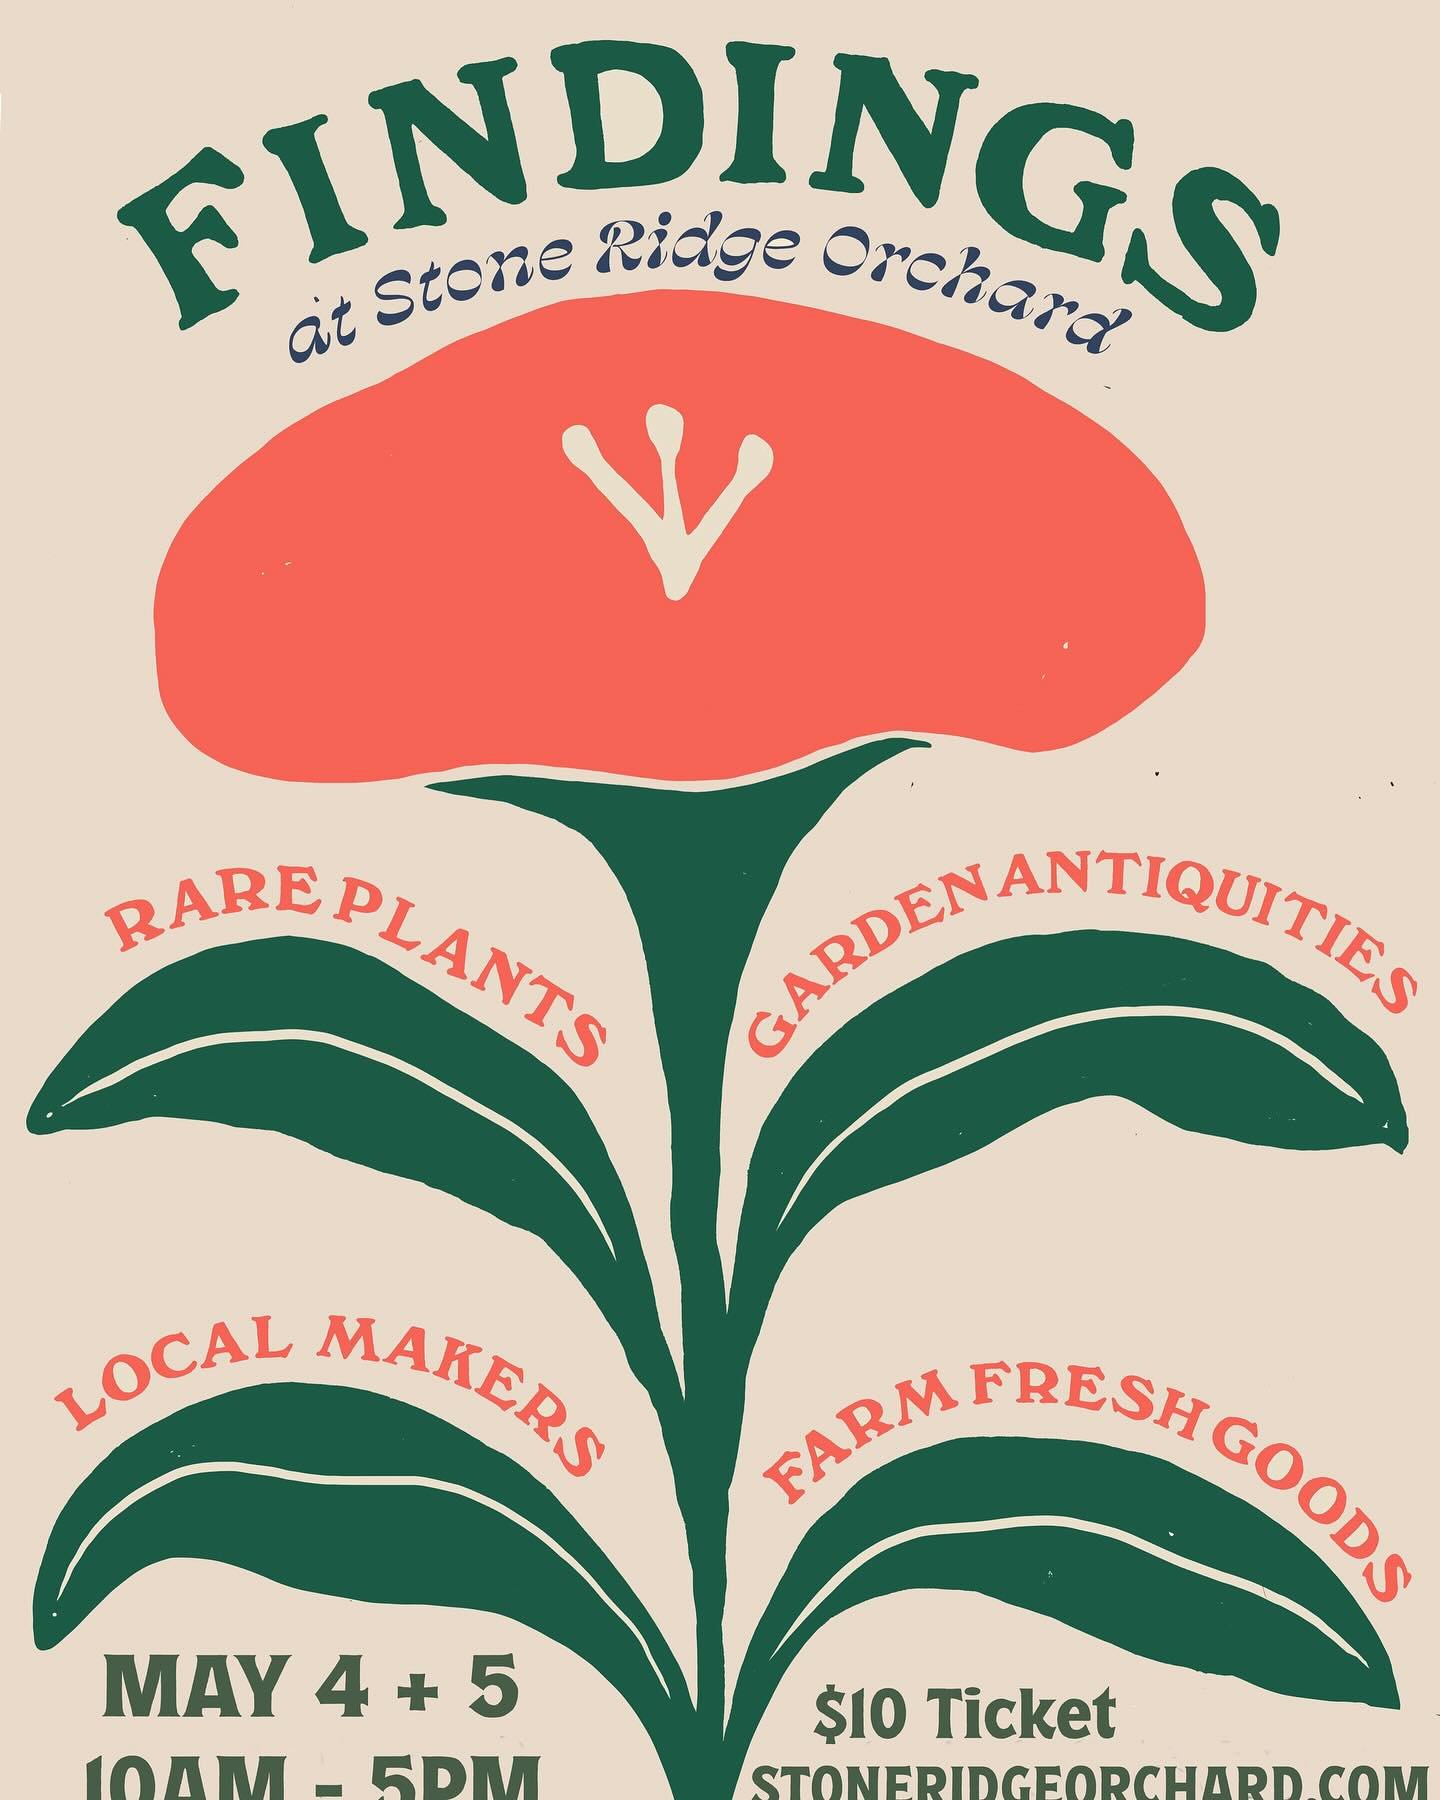 BIG NEWS!🌸 Our first market of the season is next weekend! Join us for FINDINGS at the Stone Ridge Orchard | May 4 + 5 | 10am-5pm!

We&rsquo;ll be joining a wonderful group of makers, farmers, and antique dealers for a weekend in the blossoming orch